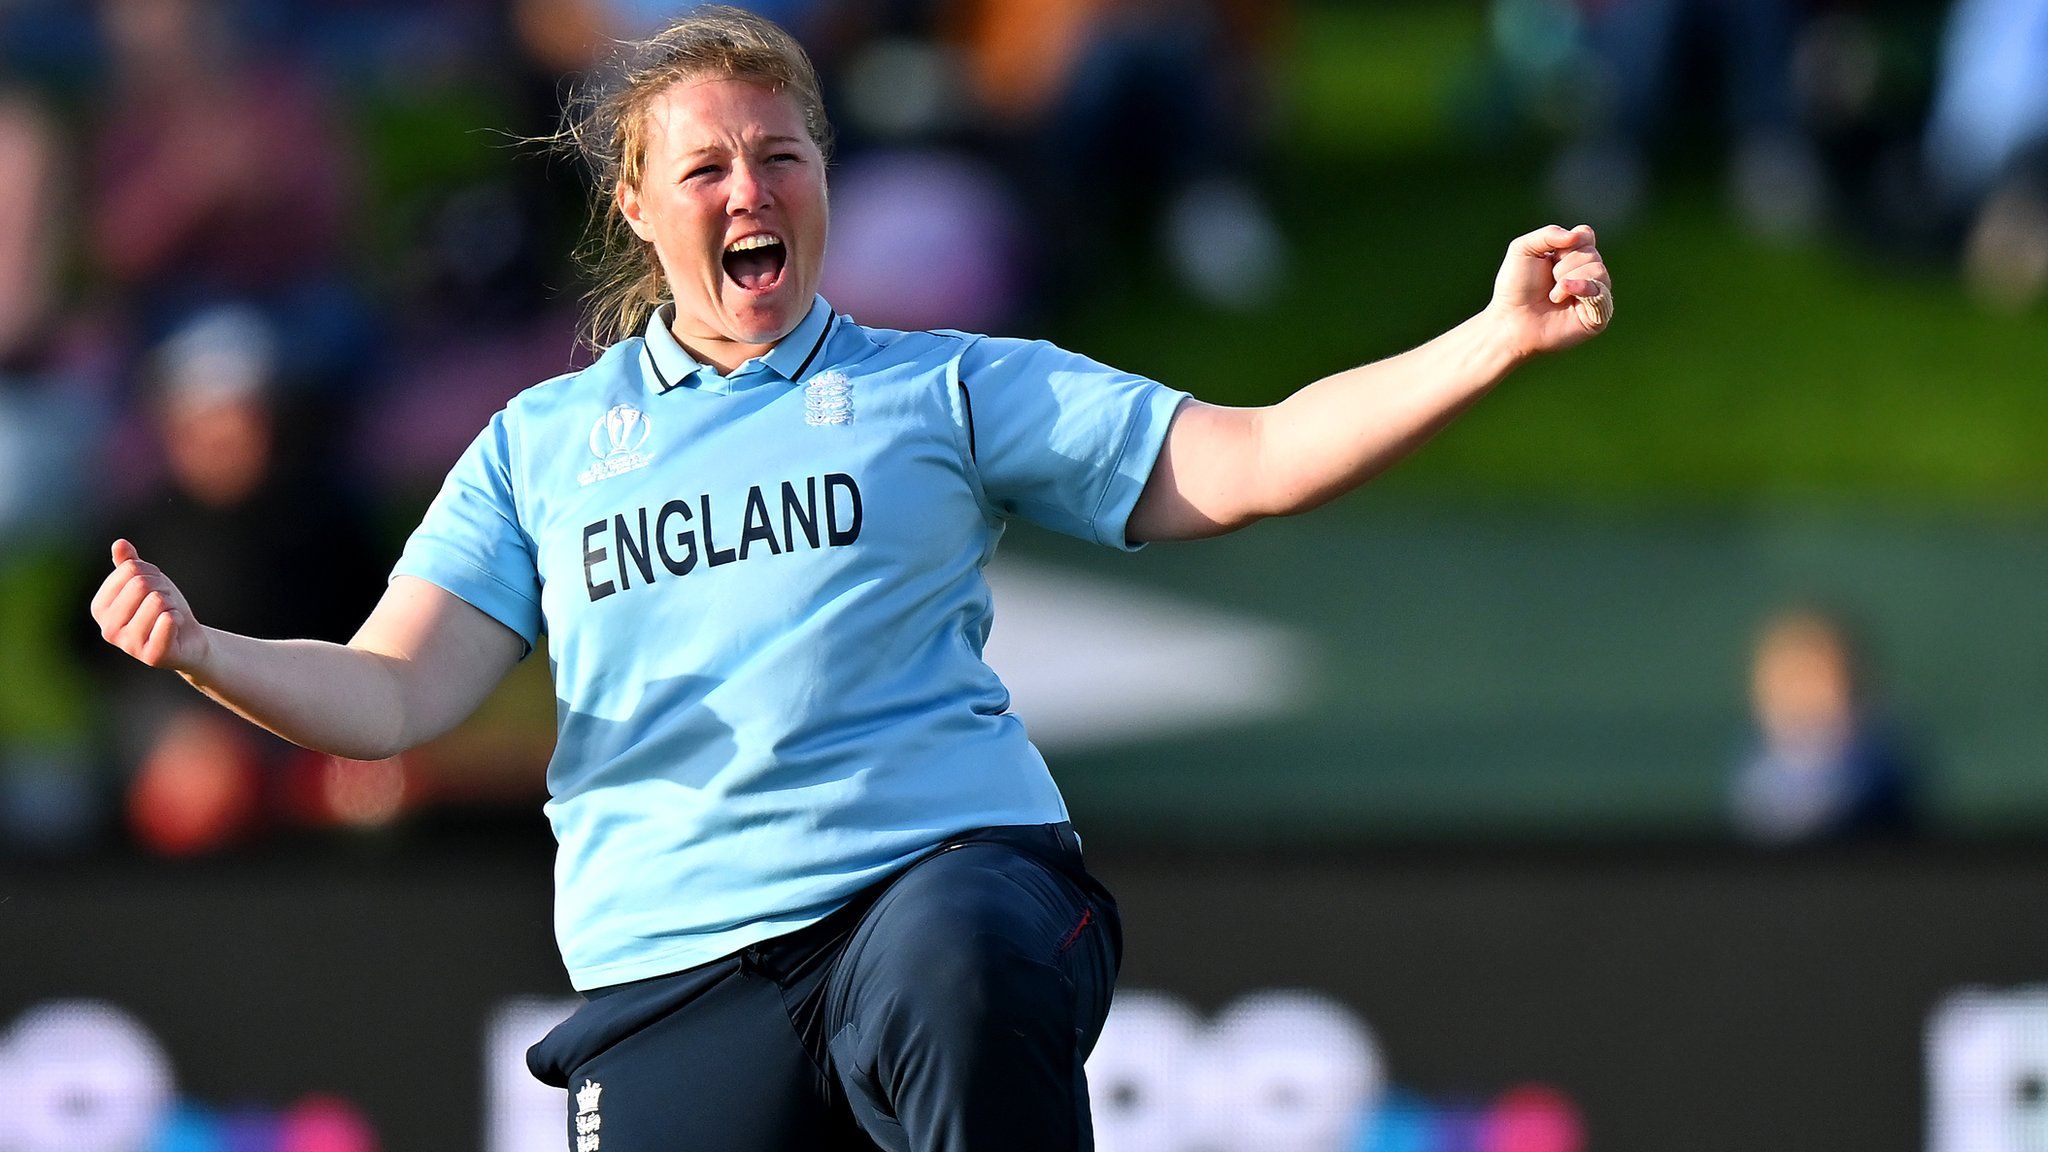 England legend and World Cup winner Anya Shrubsole has announced she will retire after this summer's The Hundred competition.